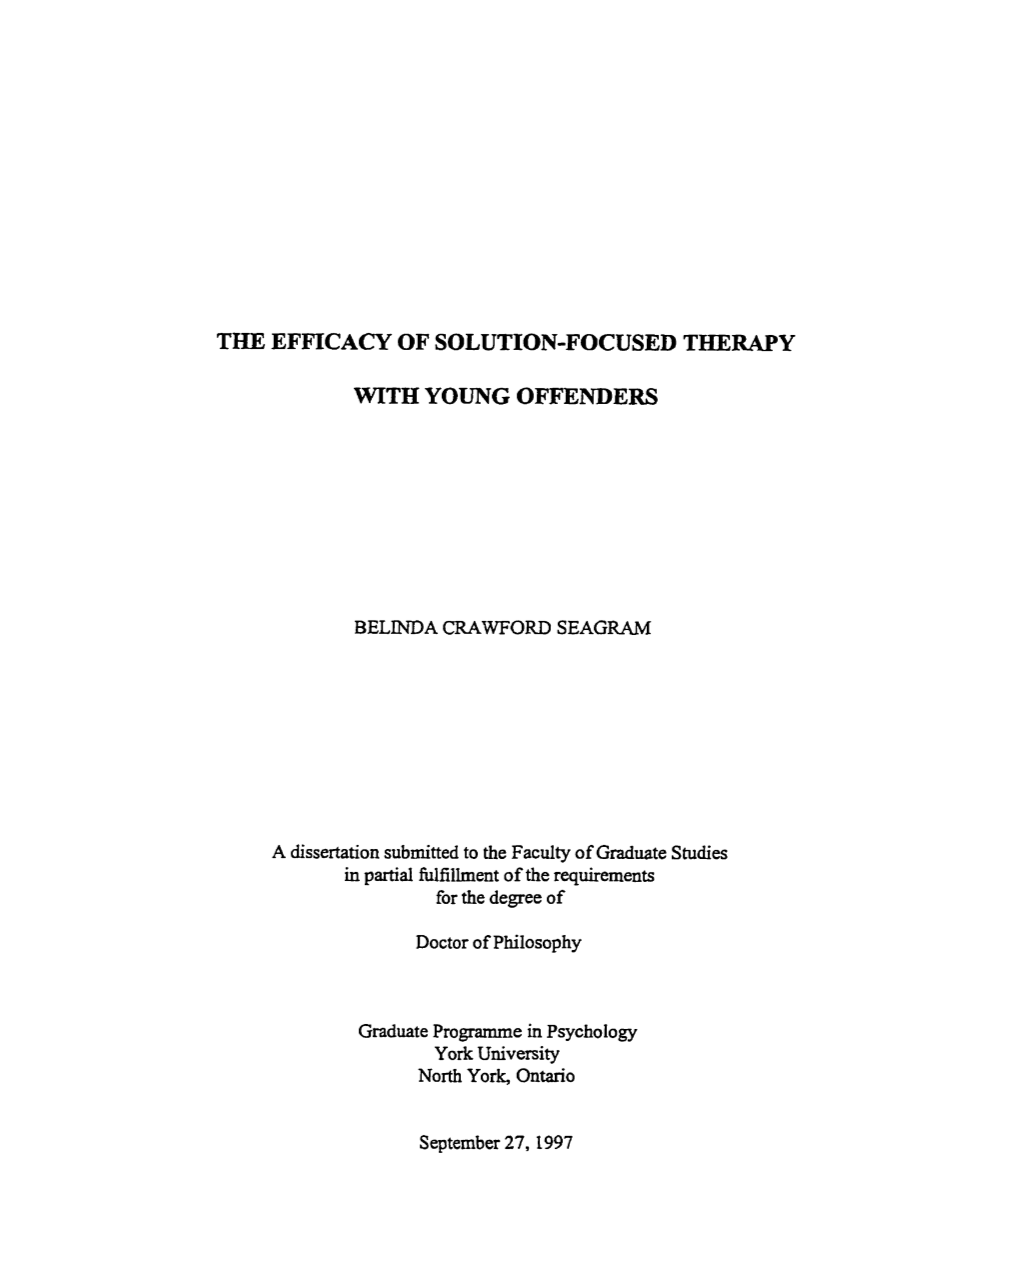 The Efftcacy of Solution-Focused Therapy